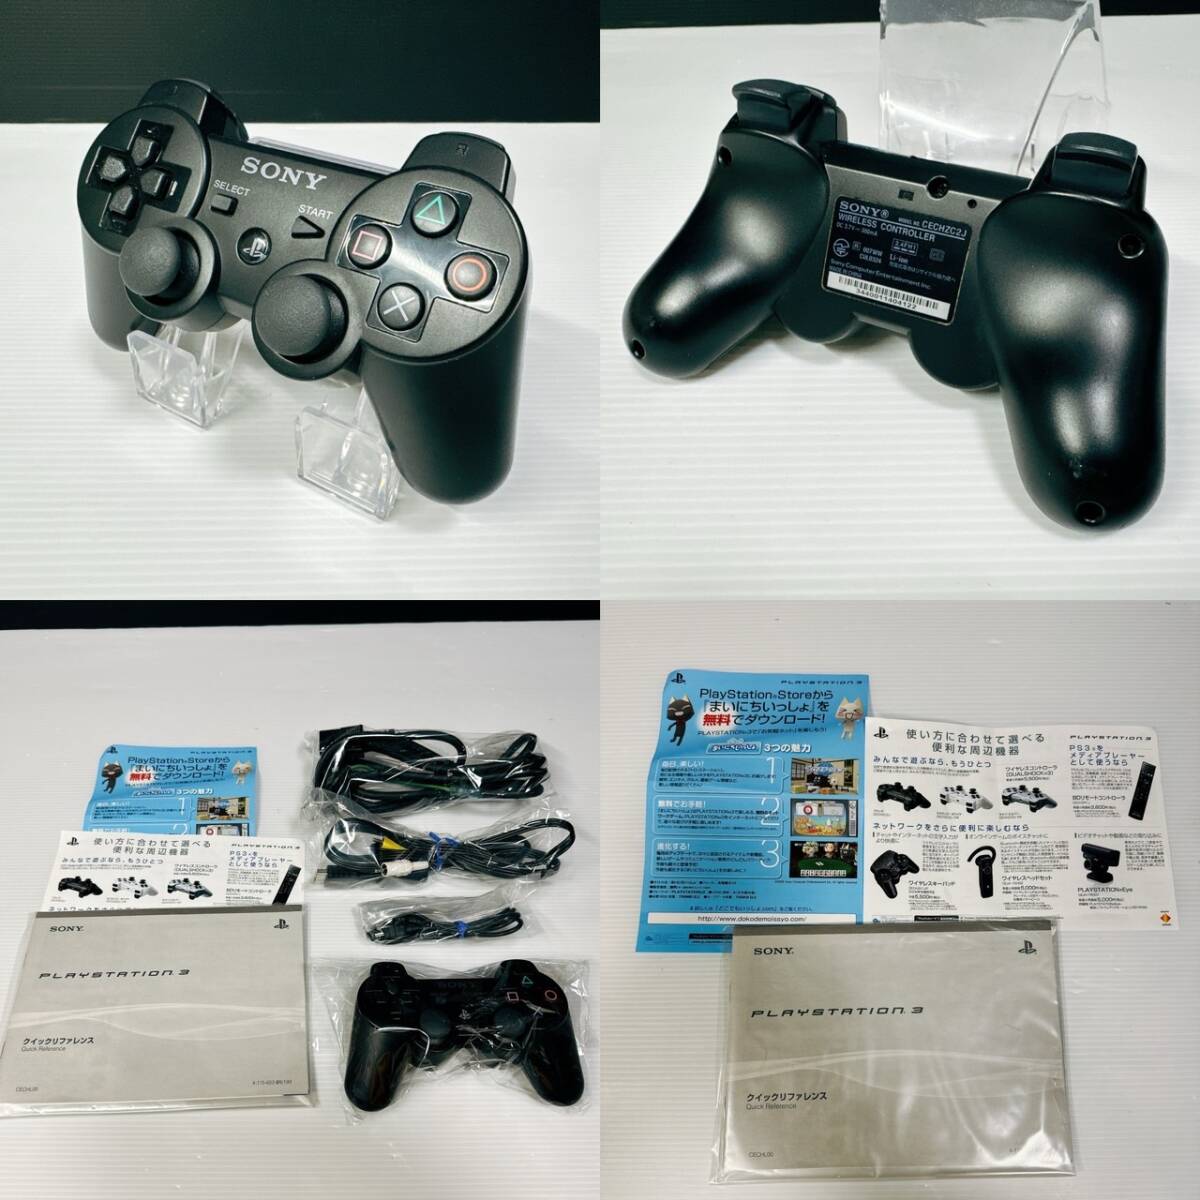  electrification has confirmed PS3 PlayStation 3 PlayStation3 CECHH00 40GB Sony SONY body outer box / inside box / printed matter / controller attached beautiful goods / Junk 